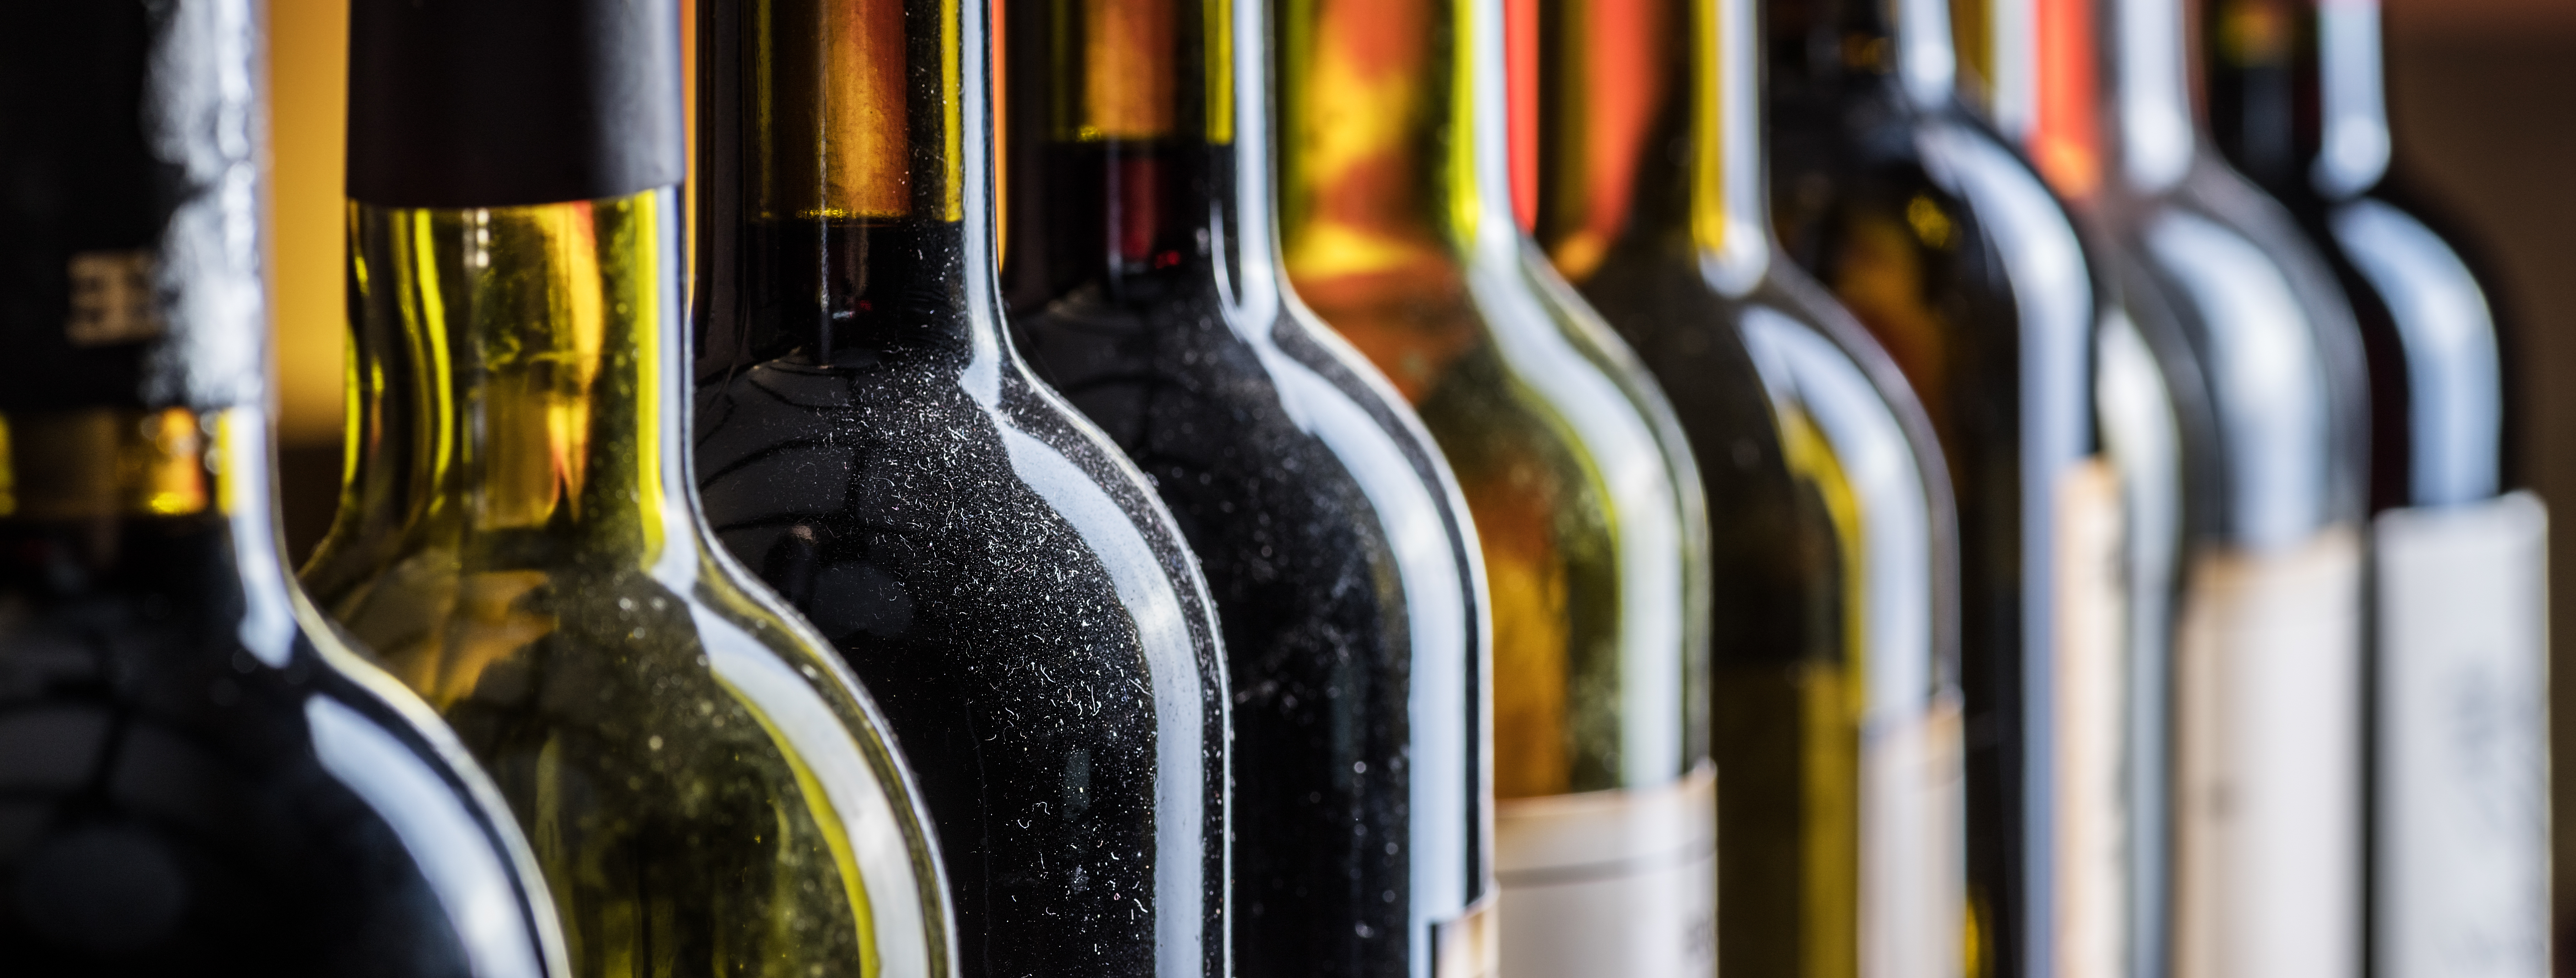 Wine bottle lineup from the cellar with each bottle dusty and a mix of red and white wines